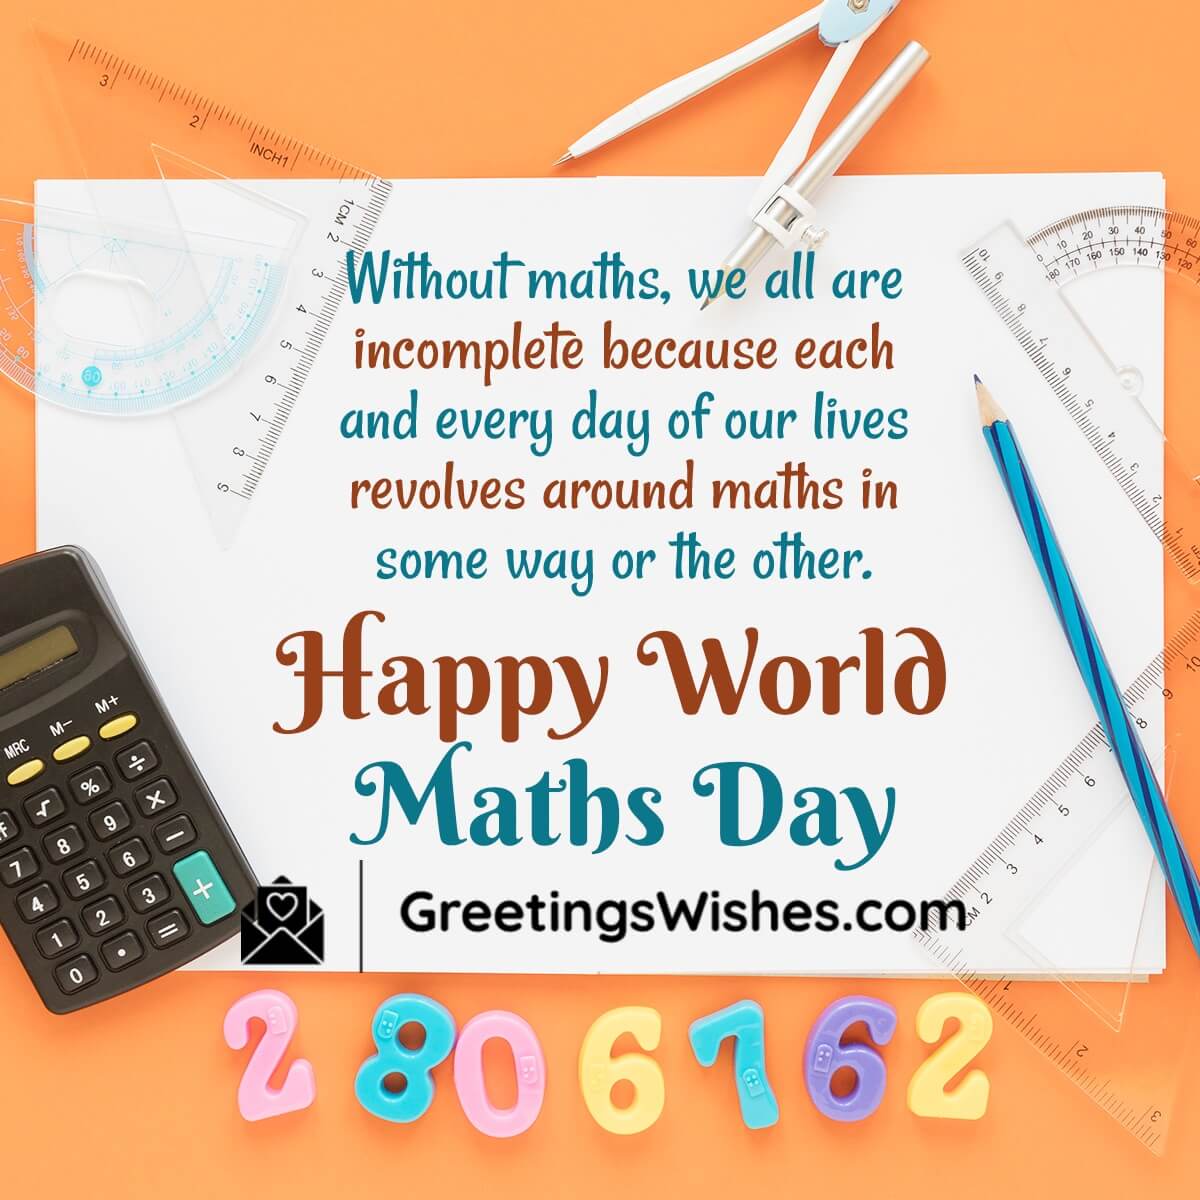 Happy World Maths Day Messages